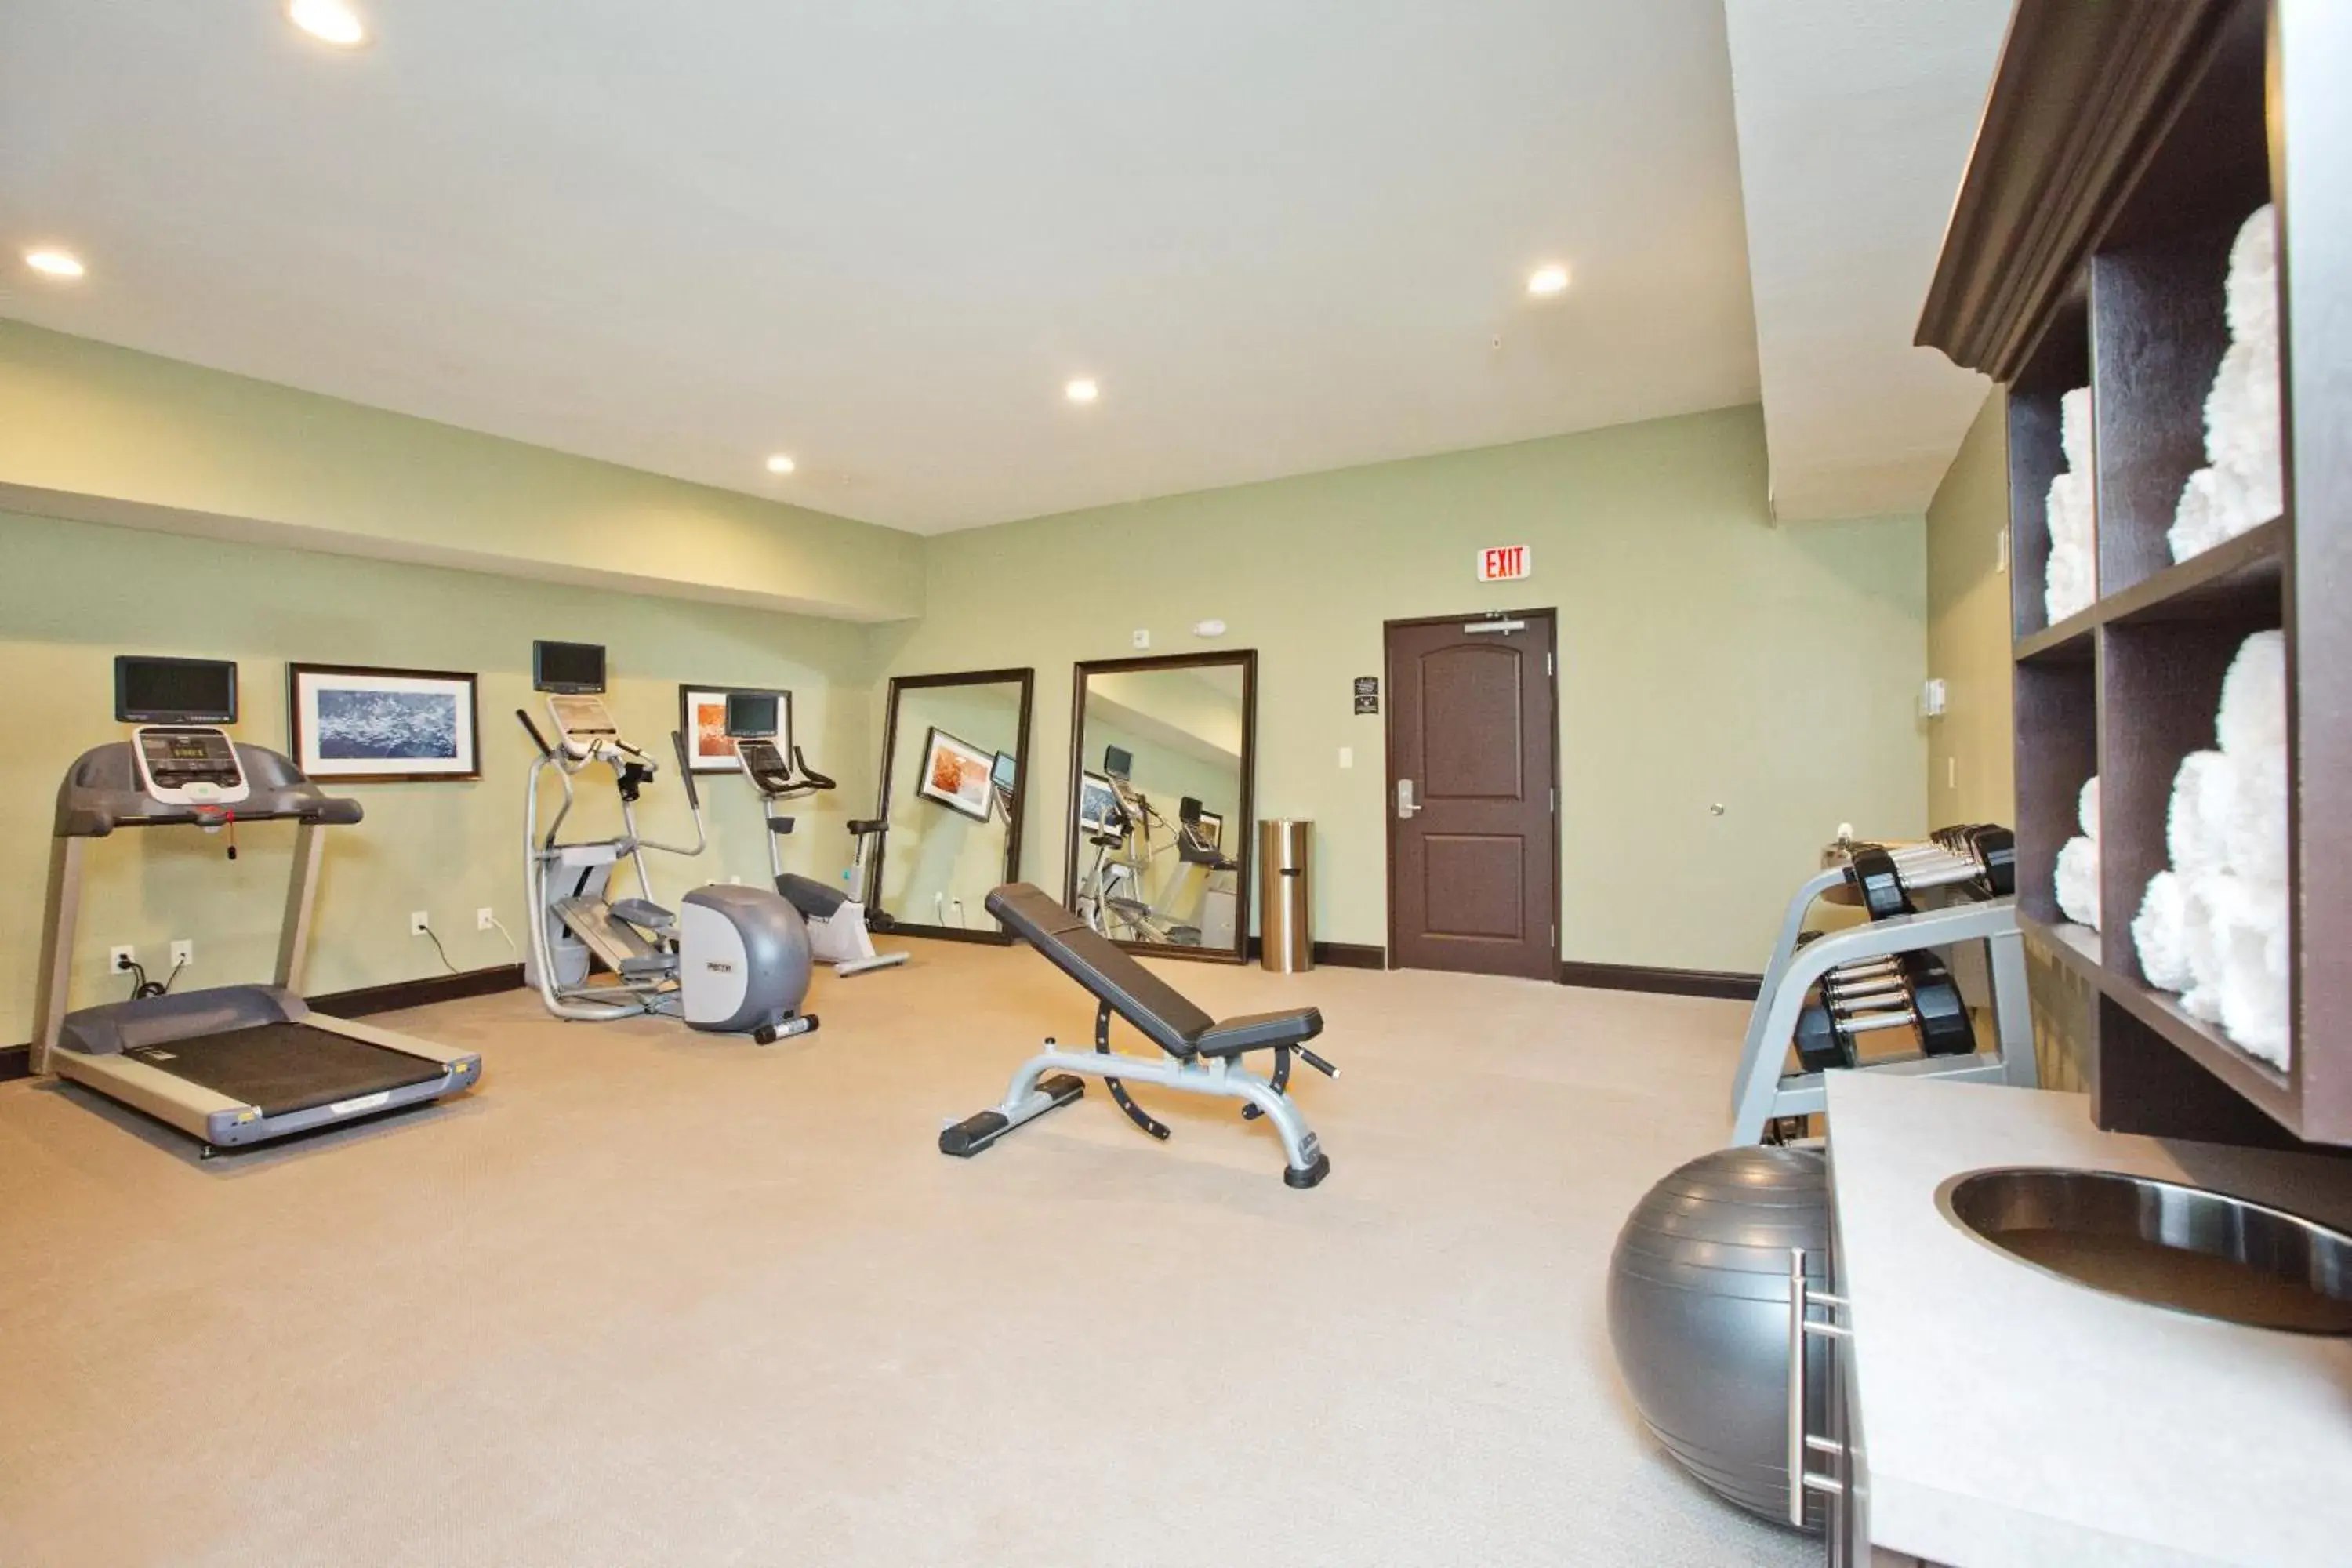 Fitness centre/facilities, Fitness Center/Facilities in Staybridge Suites Austin South Interstate Hwy 35, an IHG Hotel